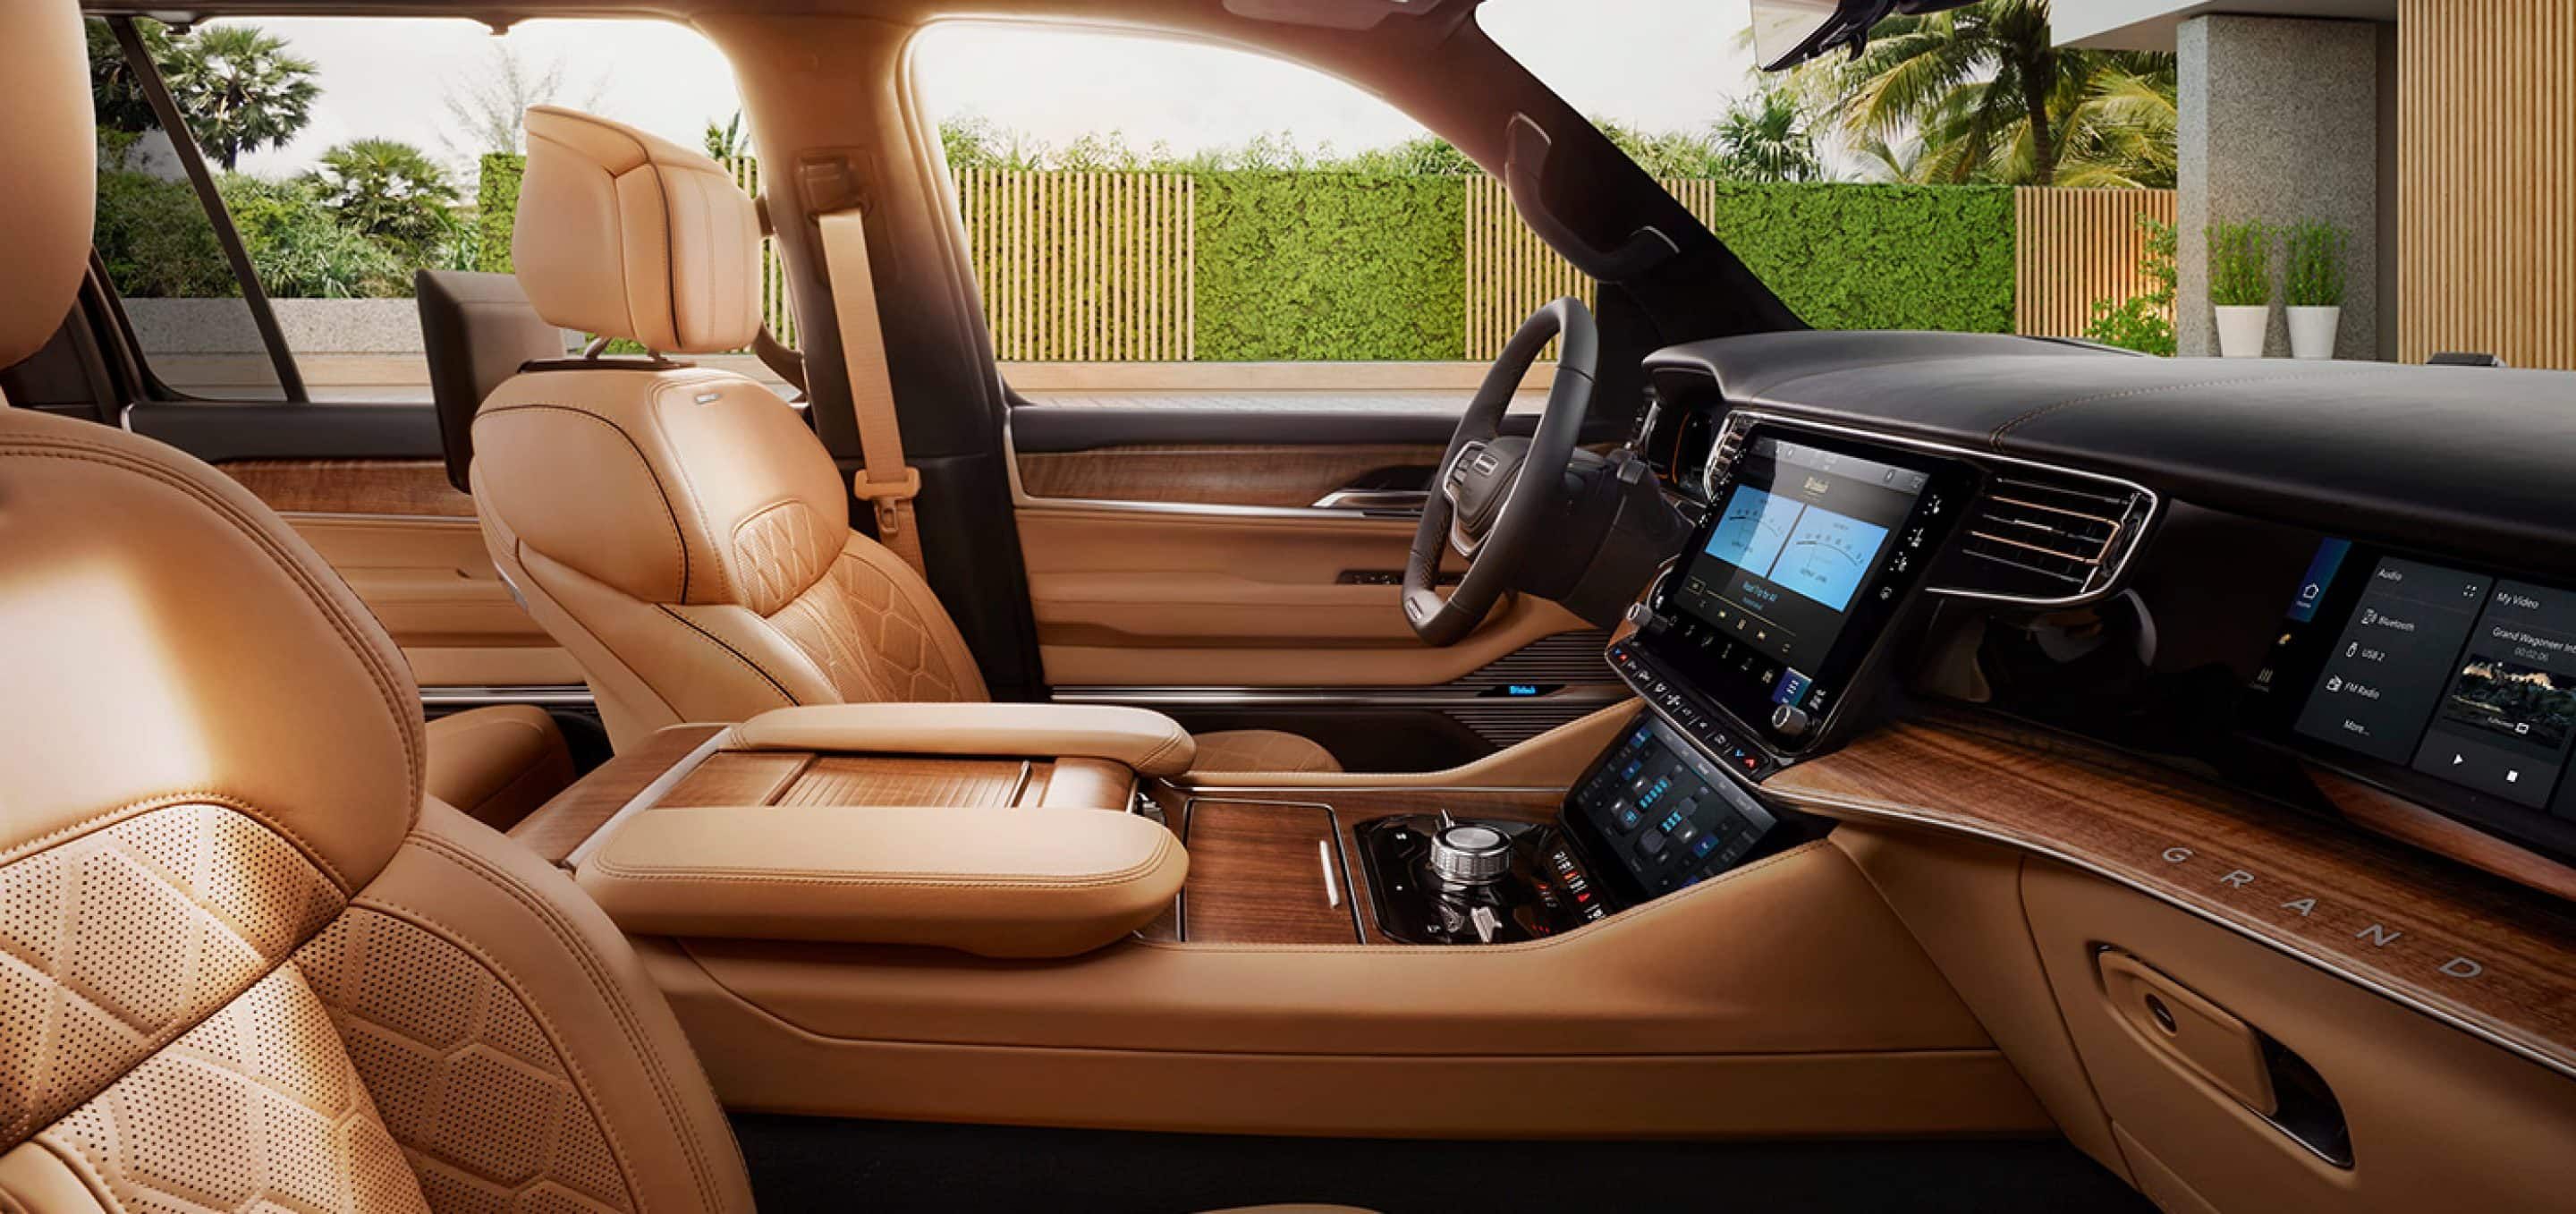 The interior of the 2022 Jeep Grand Wagoneer.